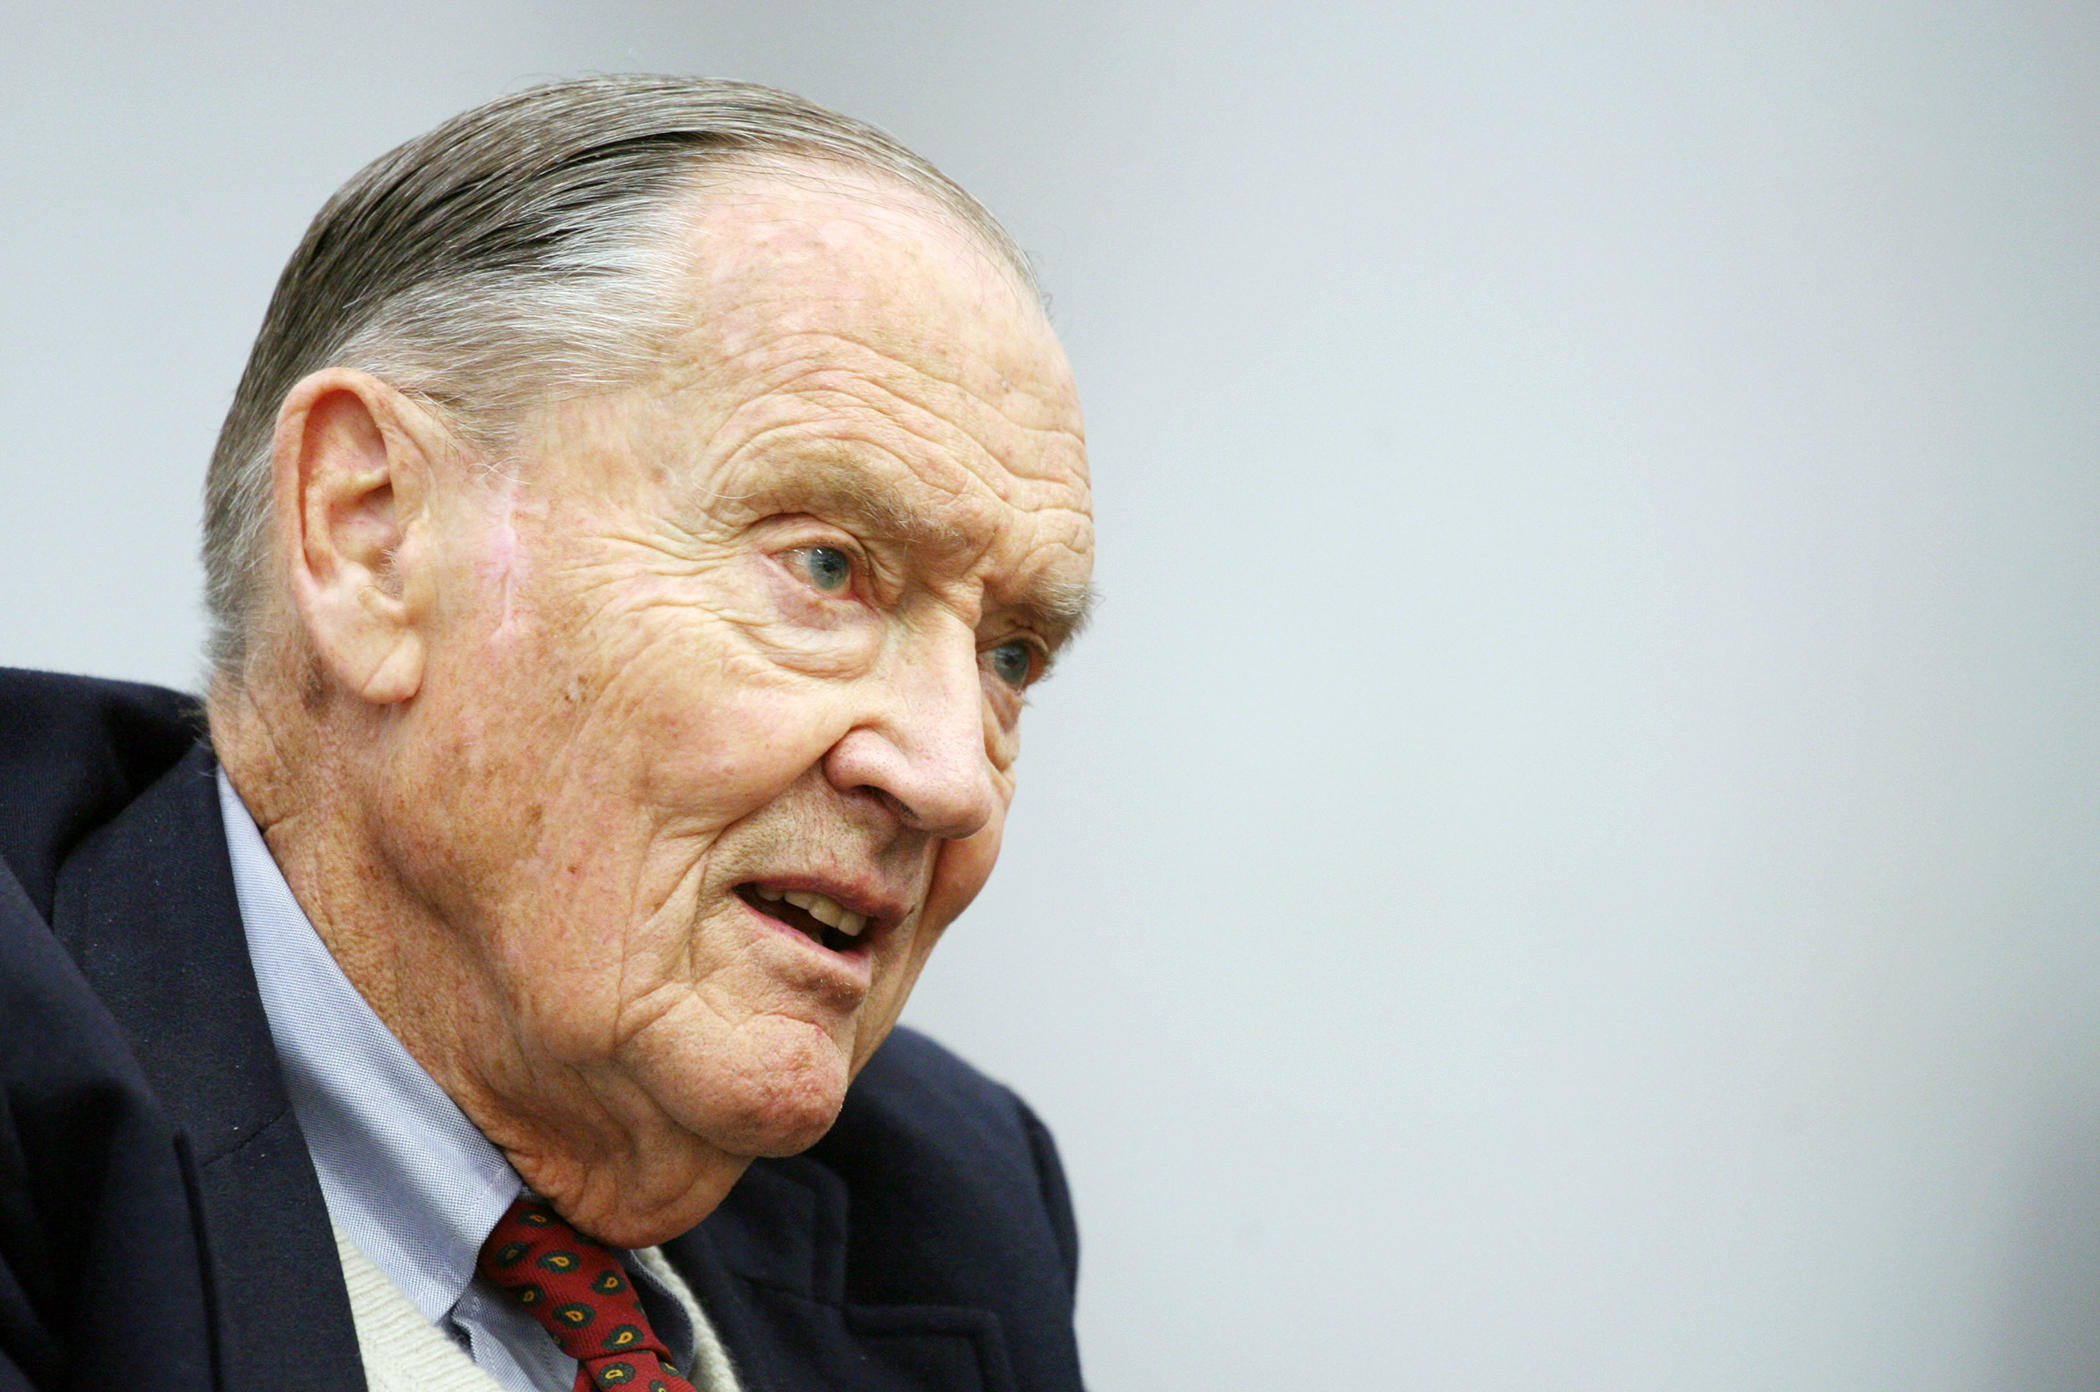 A Retirement Crisis? There Are Actually Three, Says Vanguard Founder Jack Bogle